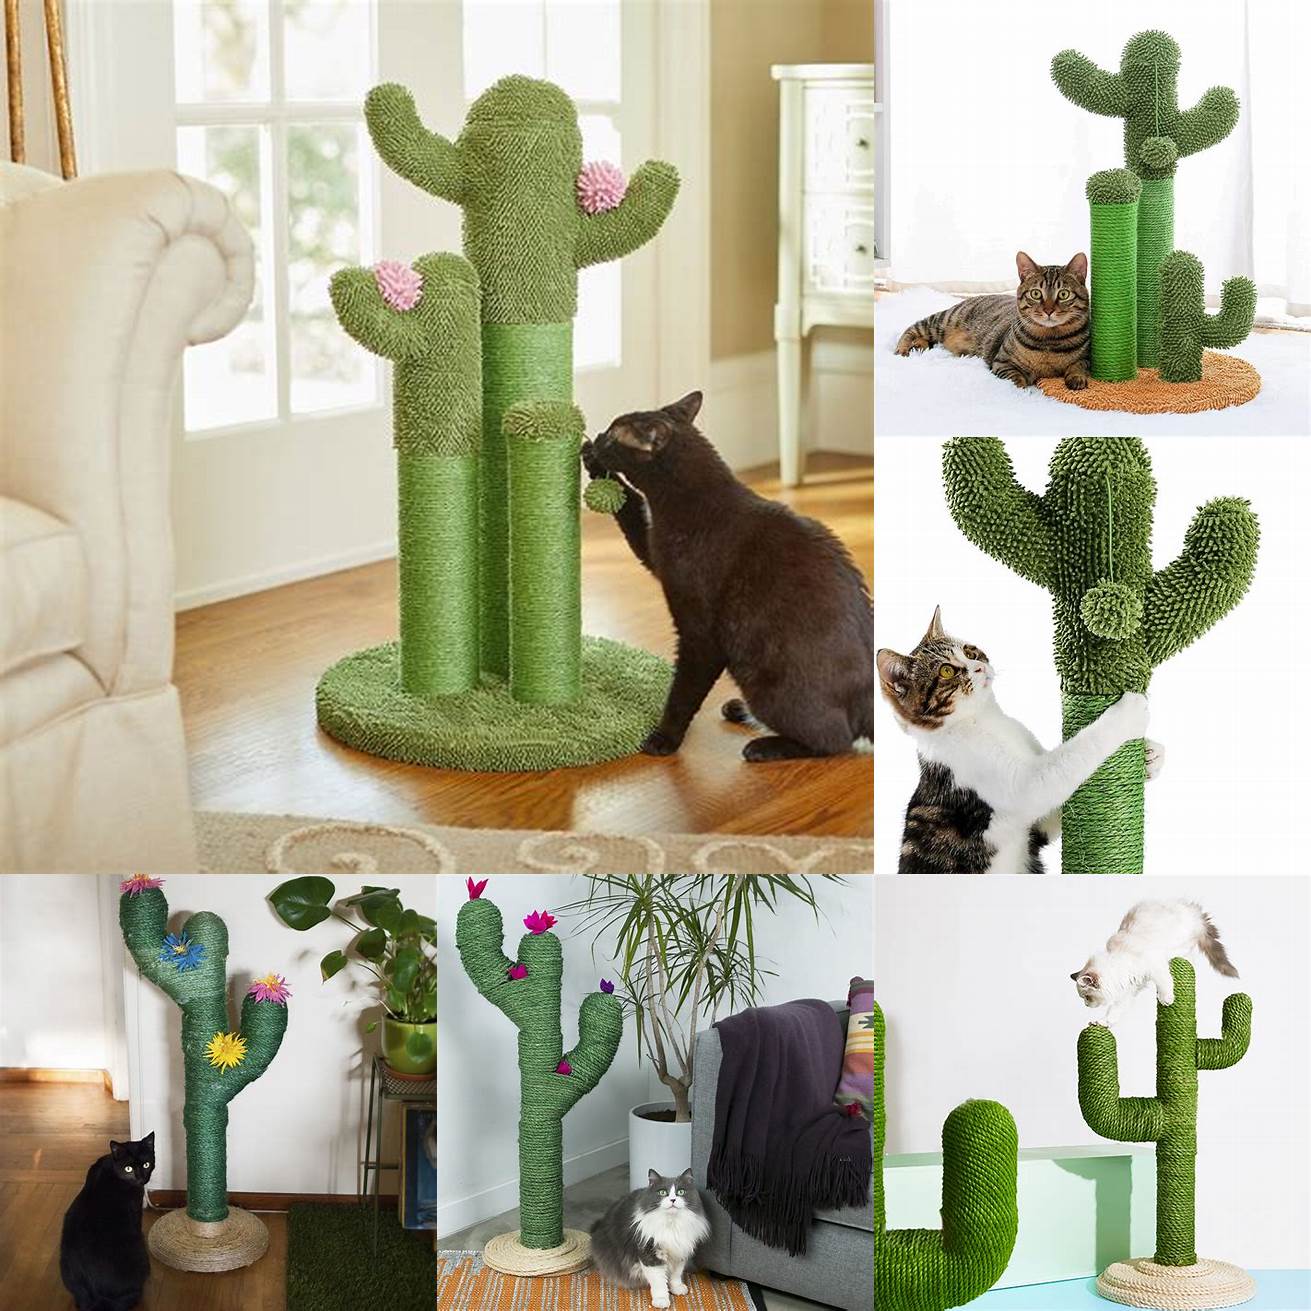 Create a cozy corner for your cat by pairing the Cactus Cat Scratching Post with a comfy bed or blanket